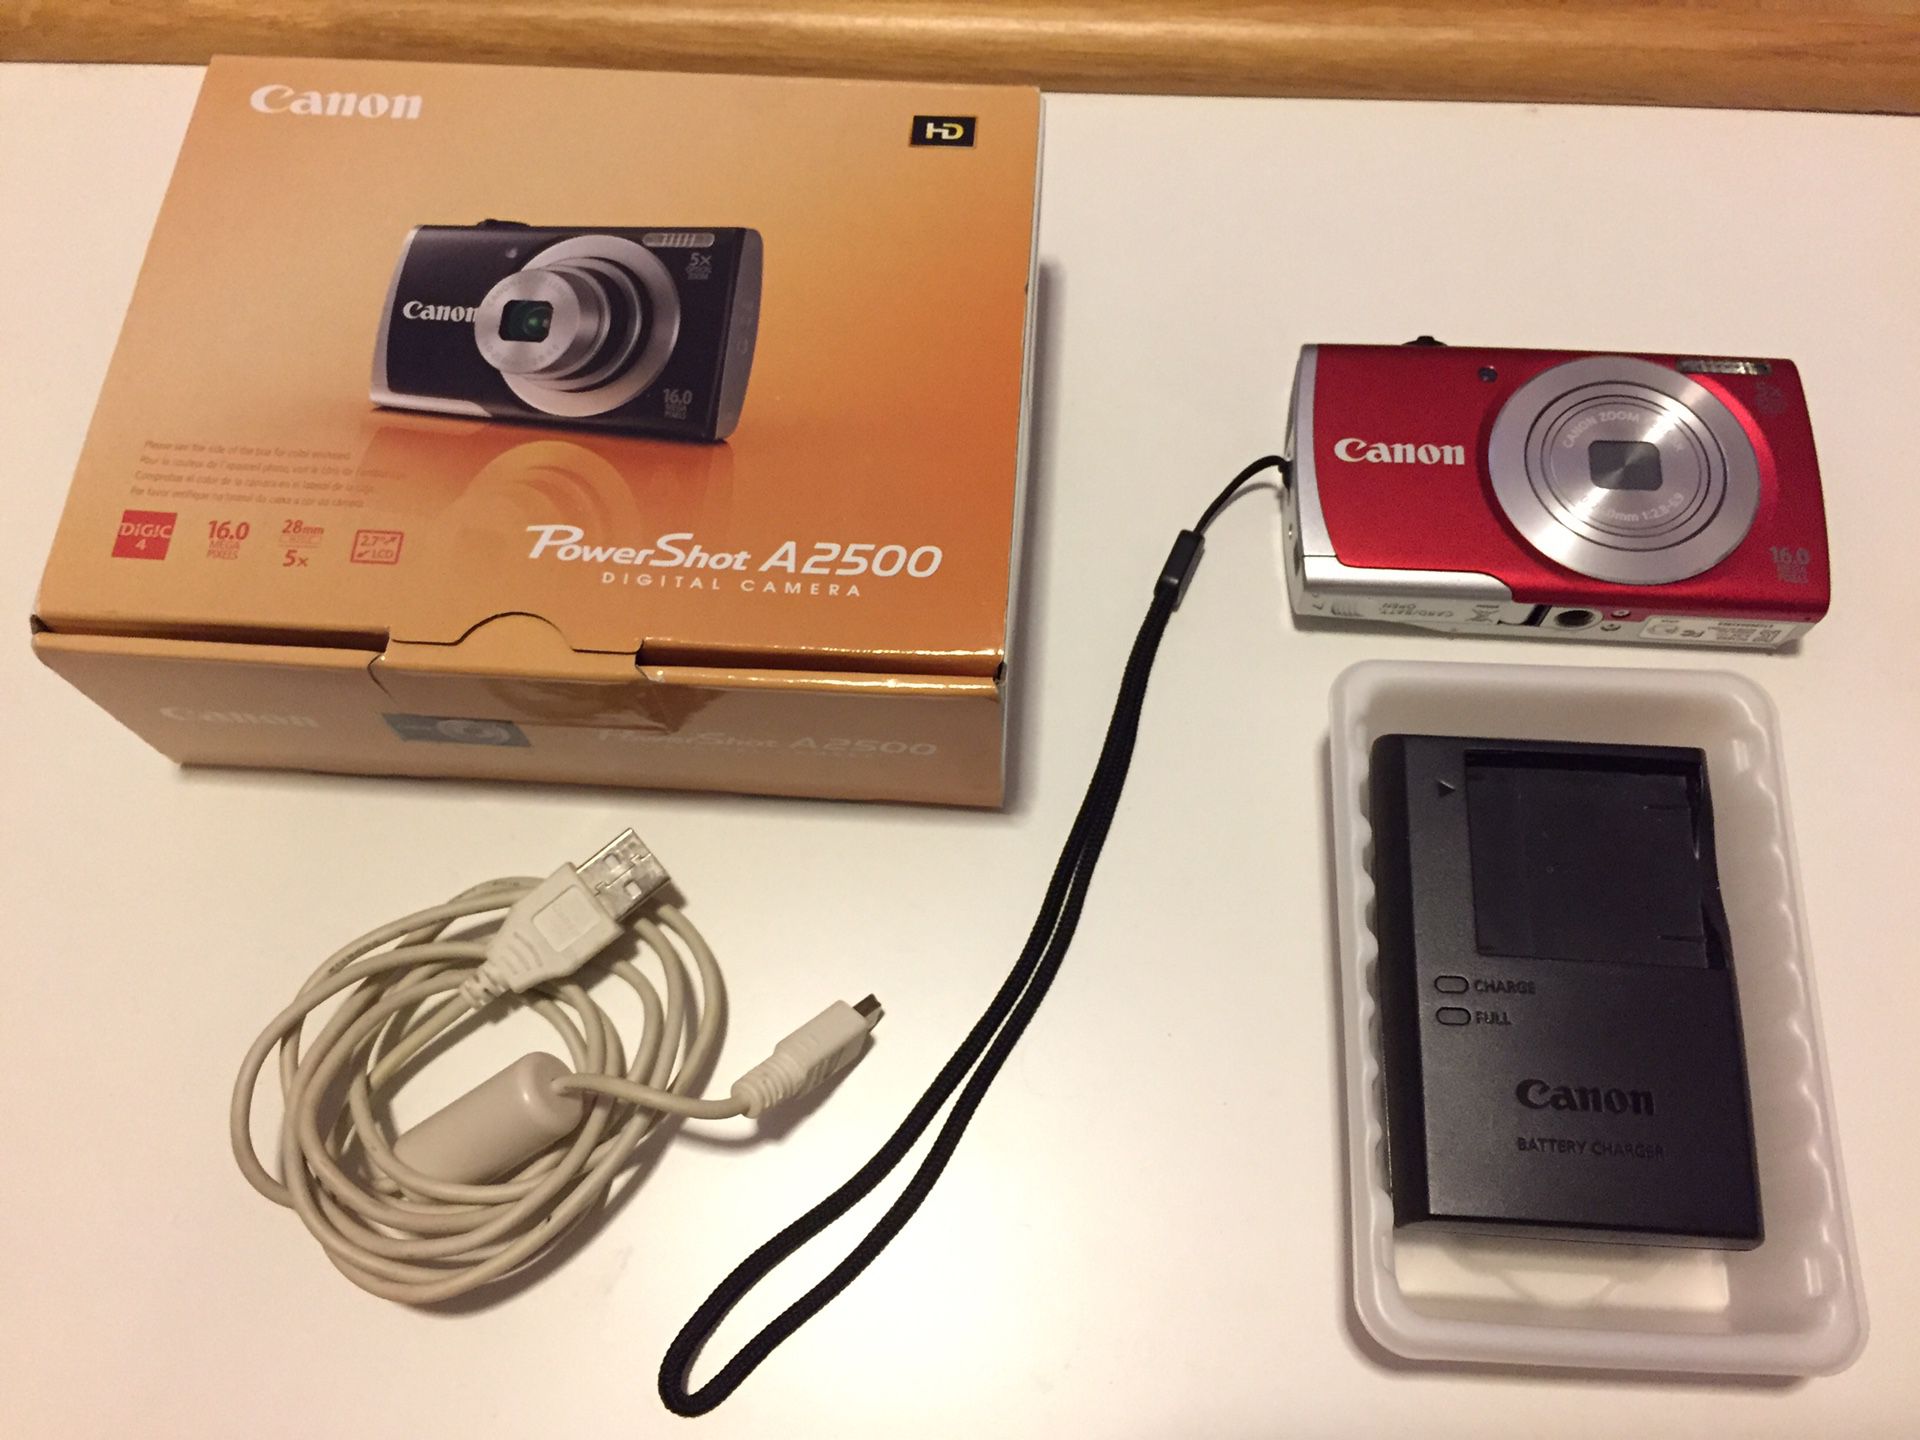 Canon Powershot A2500 with memory card and charger